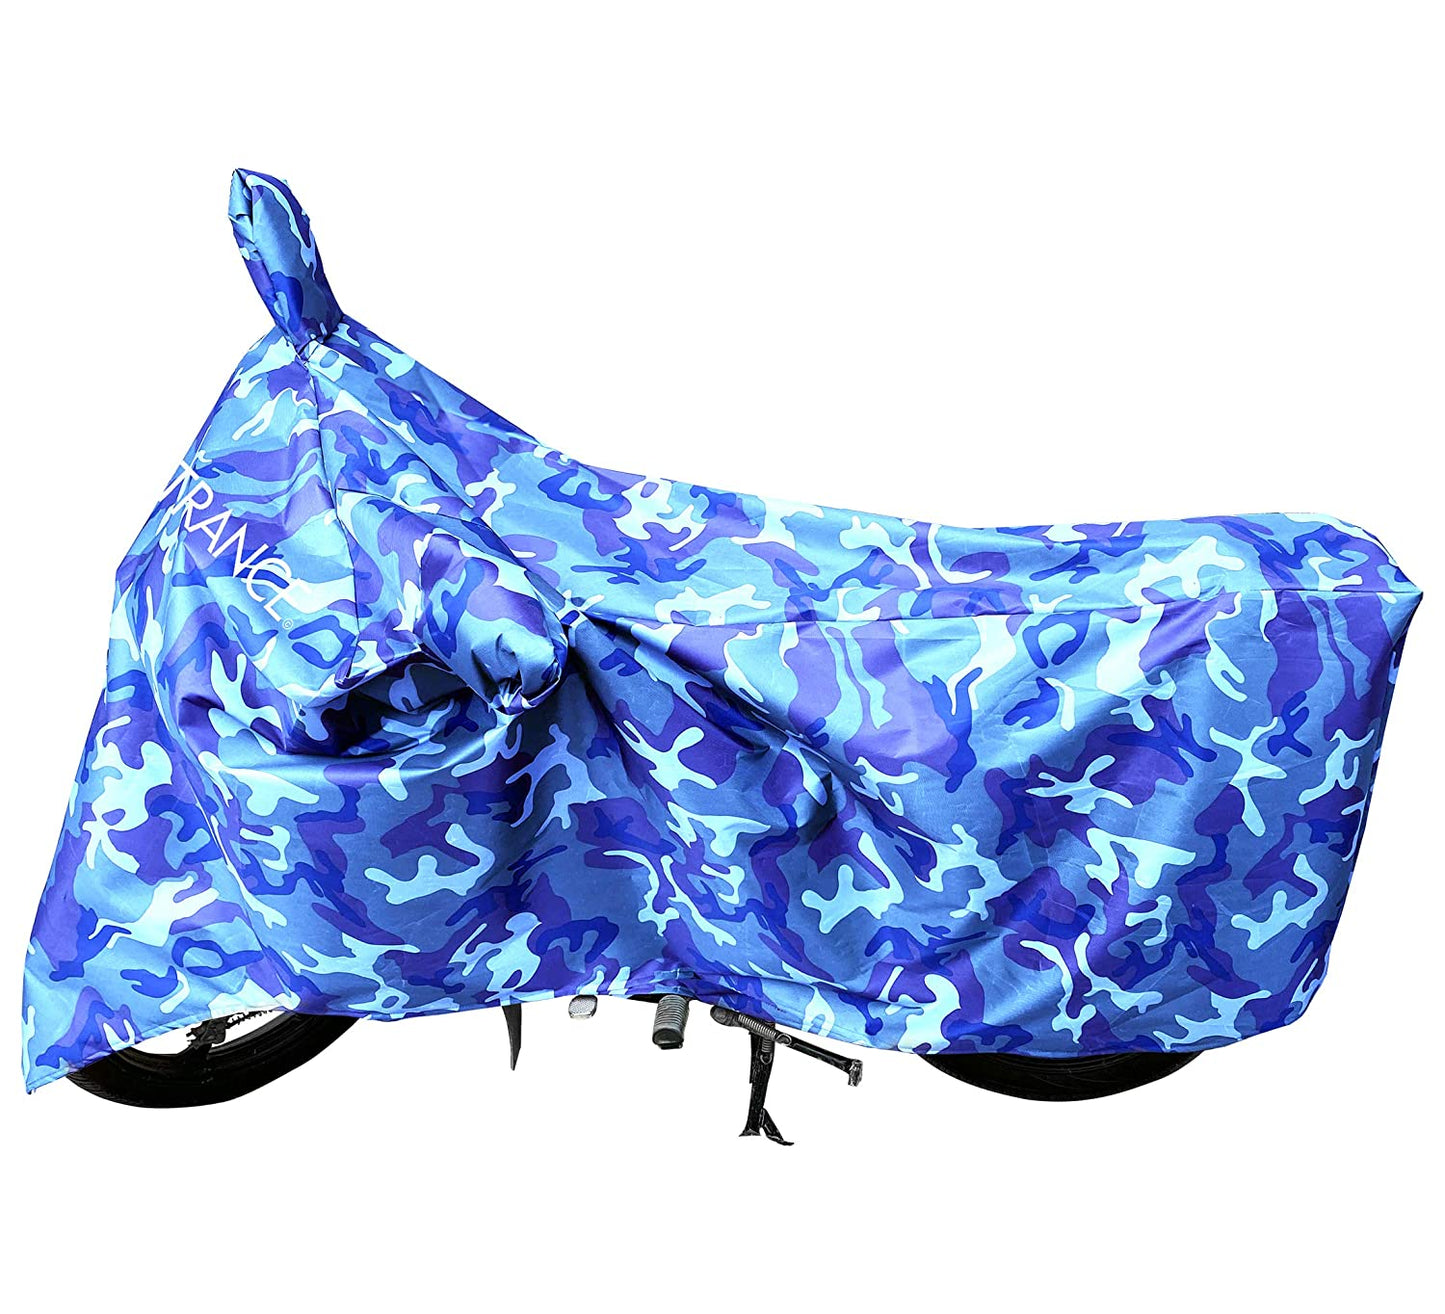 MotoTrance Jungle Bike Body Covers For Hero Splendor - Interlock-Stitched Waterproof and Heat Resistant with Mirror Pockets